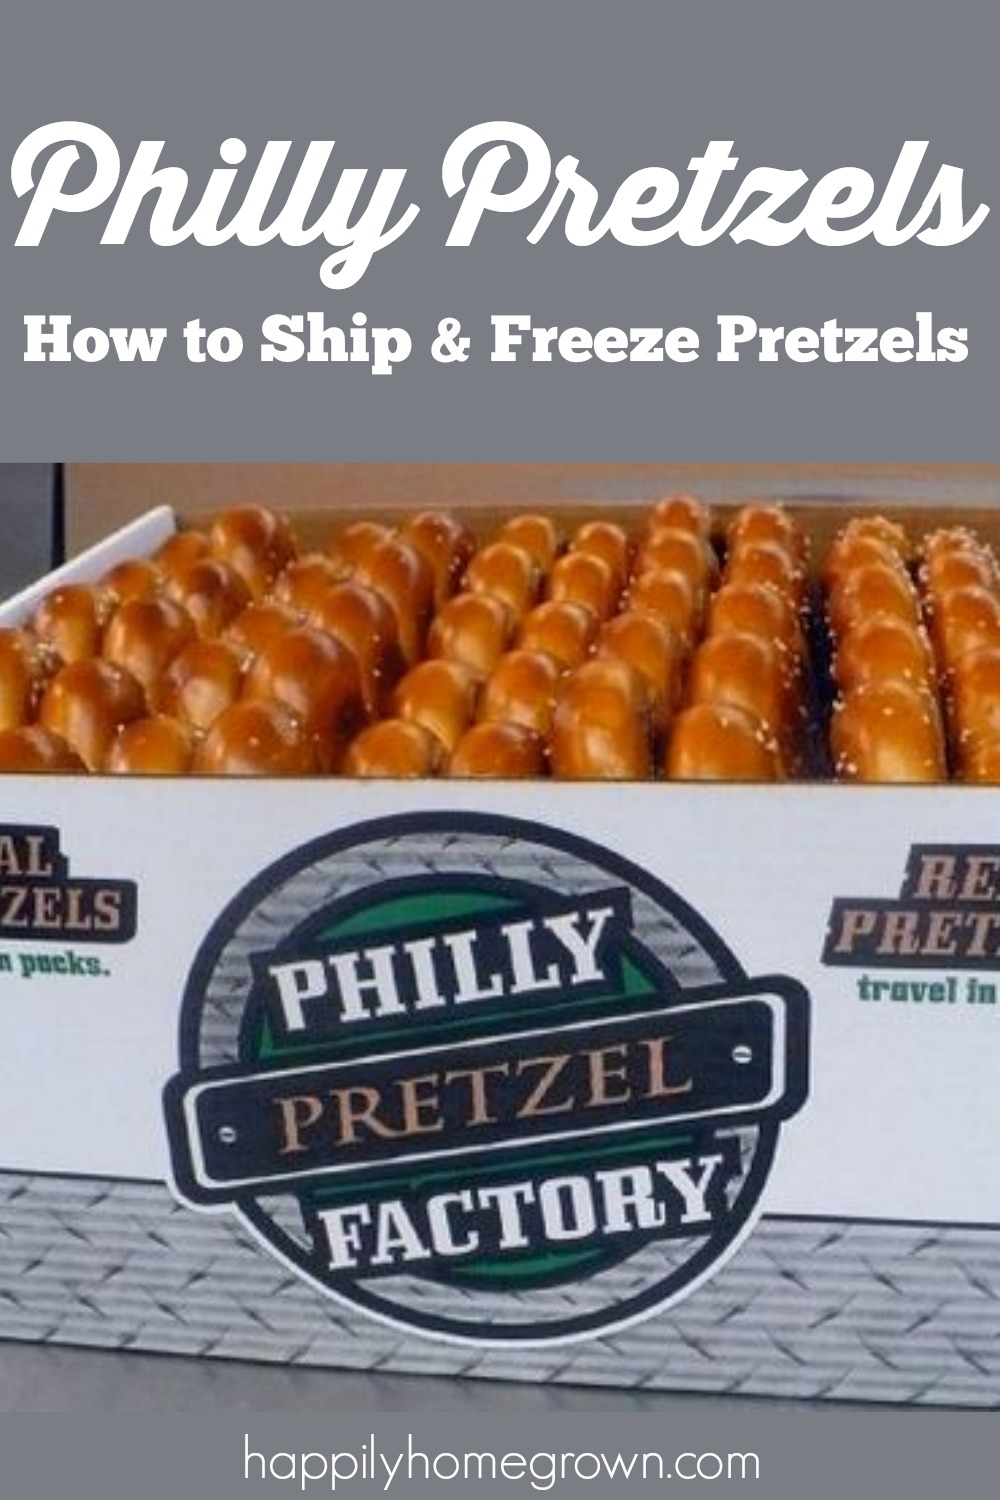 Want to ship Philly Pretzels to your friends & family around the country?  Here are a few tips for how to ship and freeze soft pretzels.